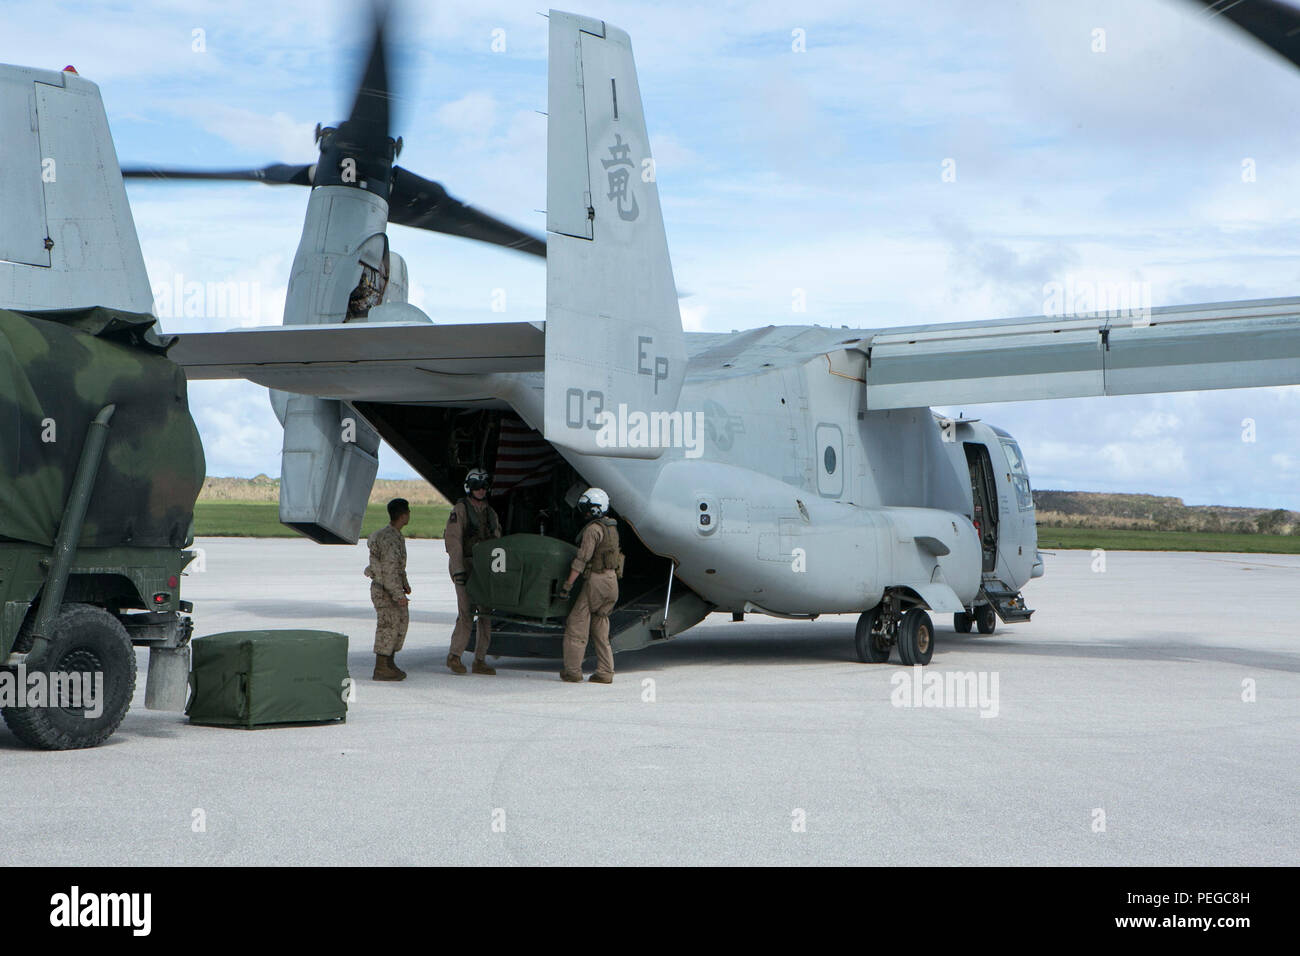 U.S. Marines from Marine Medium Tiltrotor Squadron 265 (Reinforced), 31st Marine Expeditionary Unit, unload a Light Weight Purification System onto a Humvee in Saipan, Aug. 10, 2015. The 31st MEU and the ships of the Bonhomme Richard Amphibious Ready Group are assisting federal and local agencies with distributing emergency relief supplies to Saipan after it was struck by Typhoon Soudelor, Aug. 2-3. (U.S. Marine Corps photo by Lance Cpl. Brian Bekkala/Released) Stock Photo